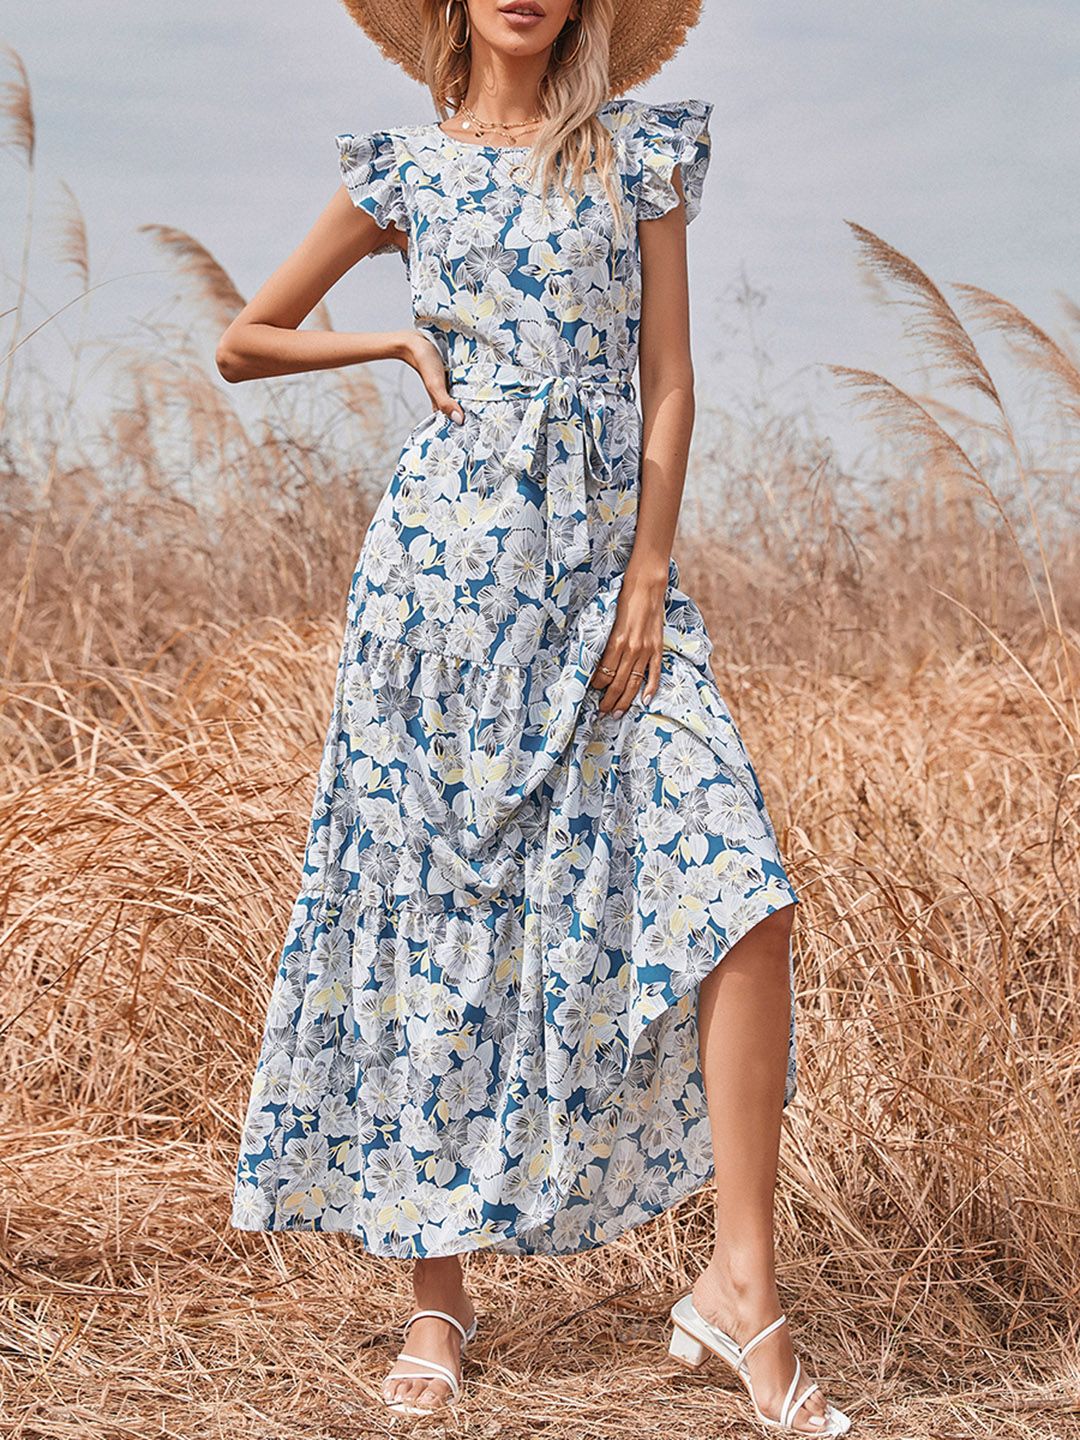 URBANIC Blue & White Floral Print Tiered Maxi Dress with Belt Price in India